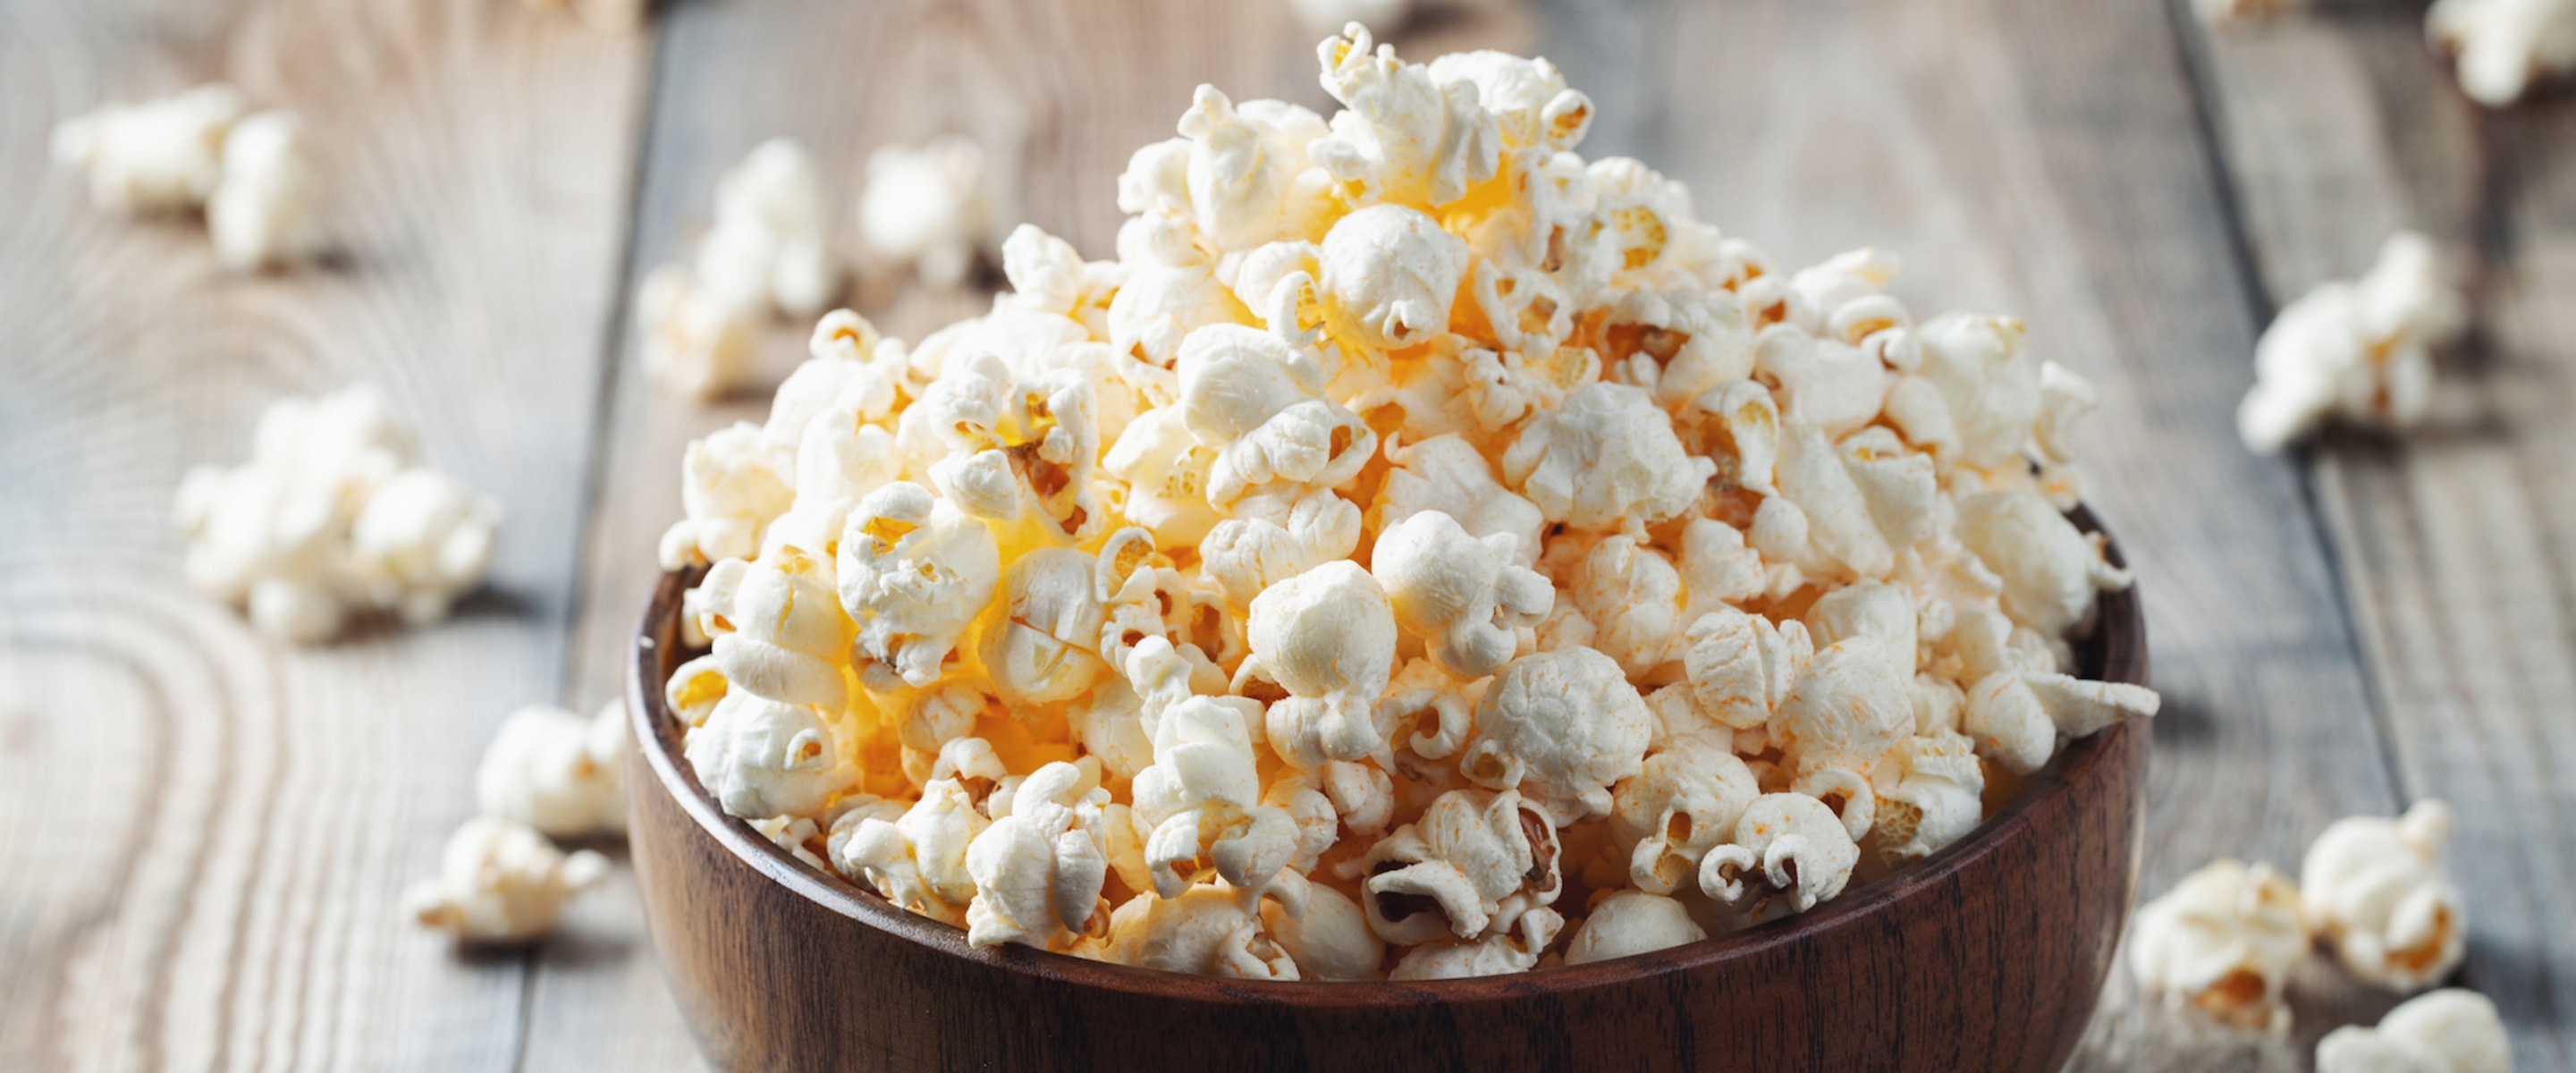 From Caramel to Masala, Here's How to Upgrade Your Popcorn